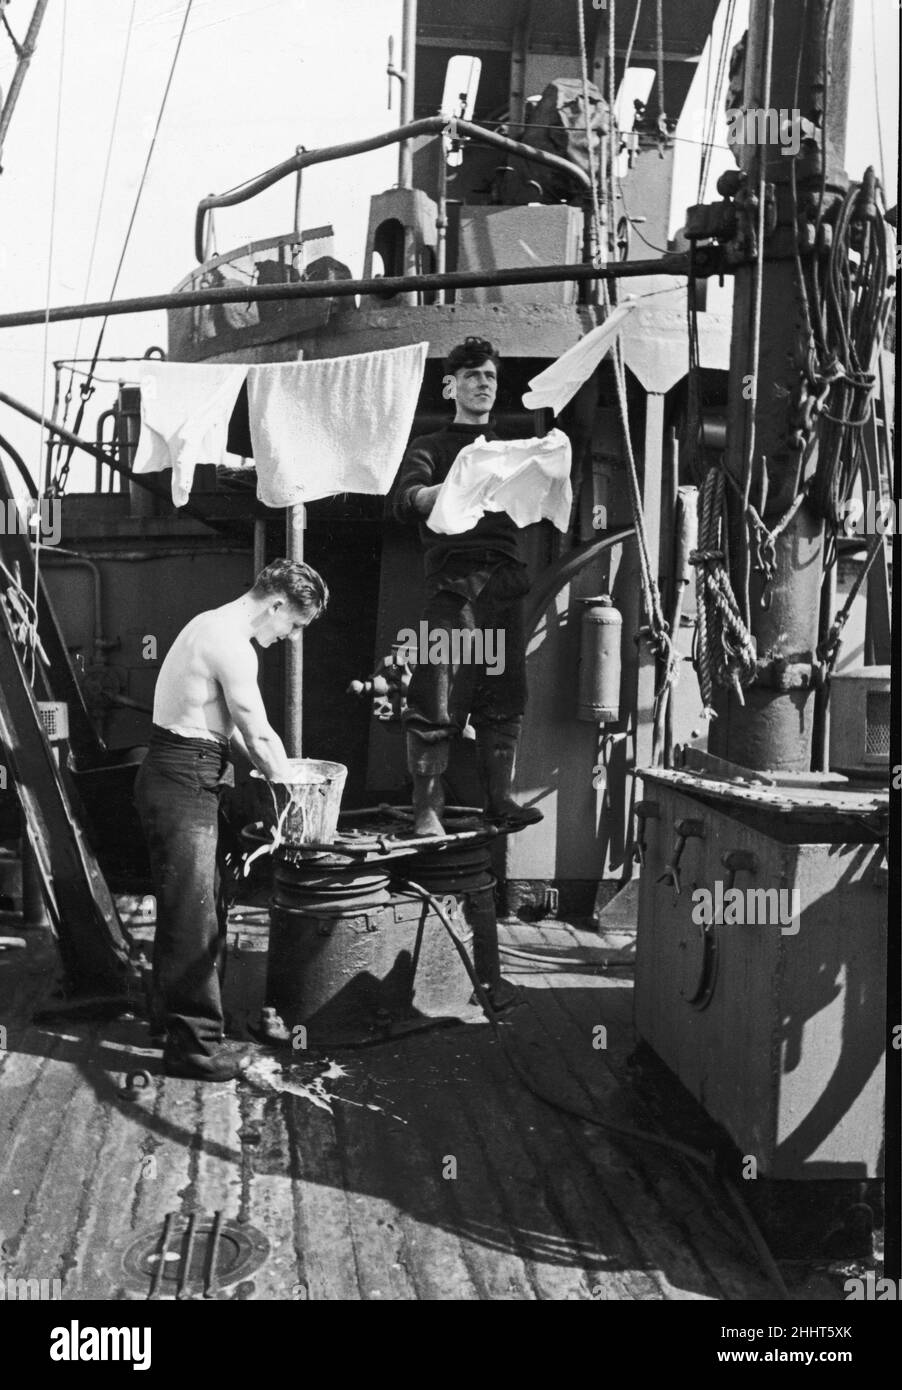 Two of the crew of a Royal Navy minesweeper on coastal convoy duties off the south west coast of England  find time between alerts to wash their smalls. September 1942 Stock Photo